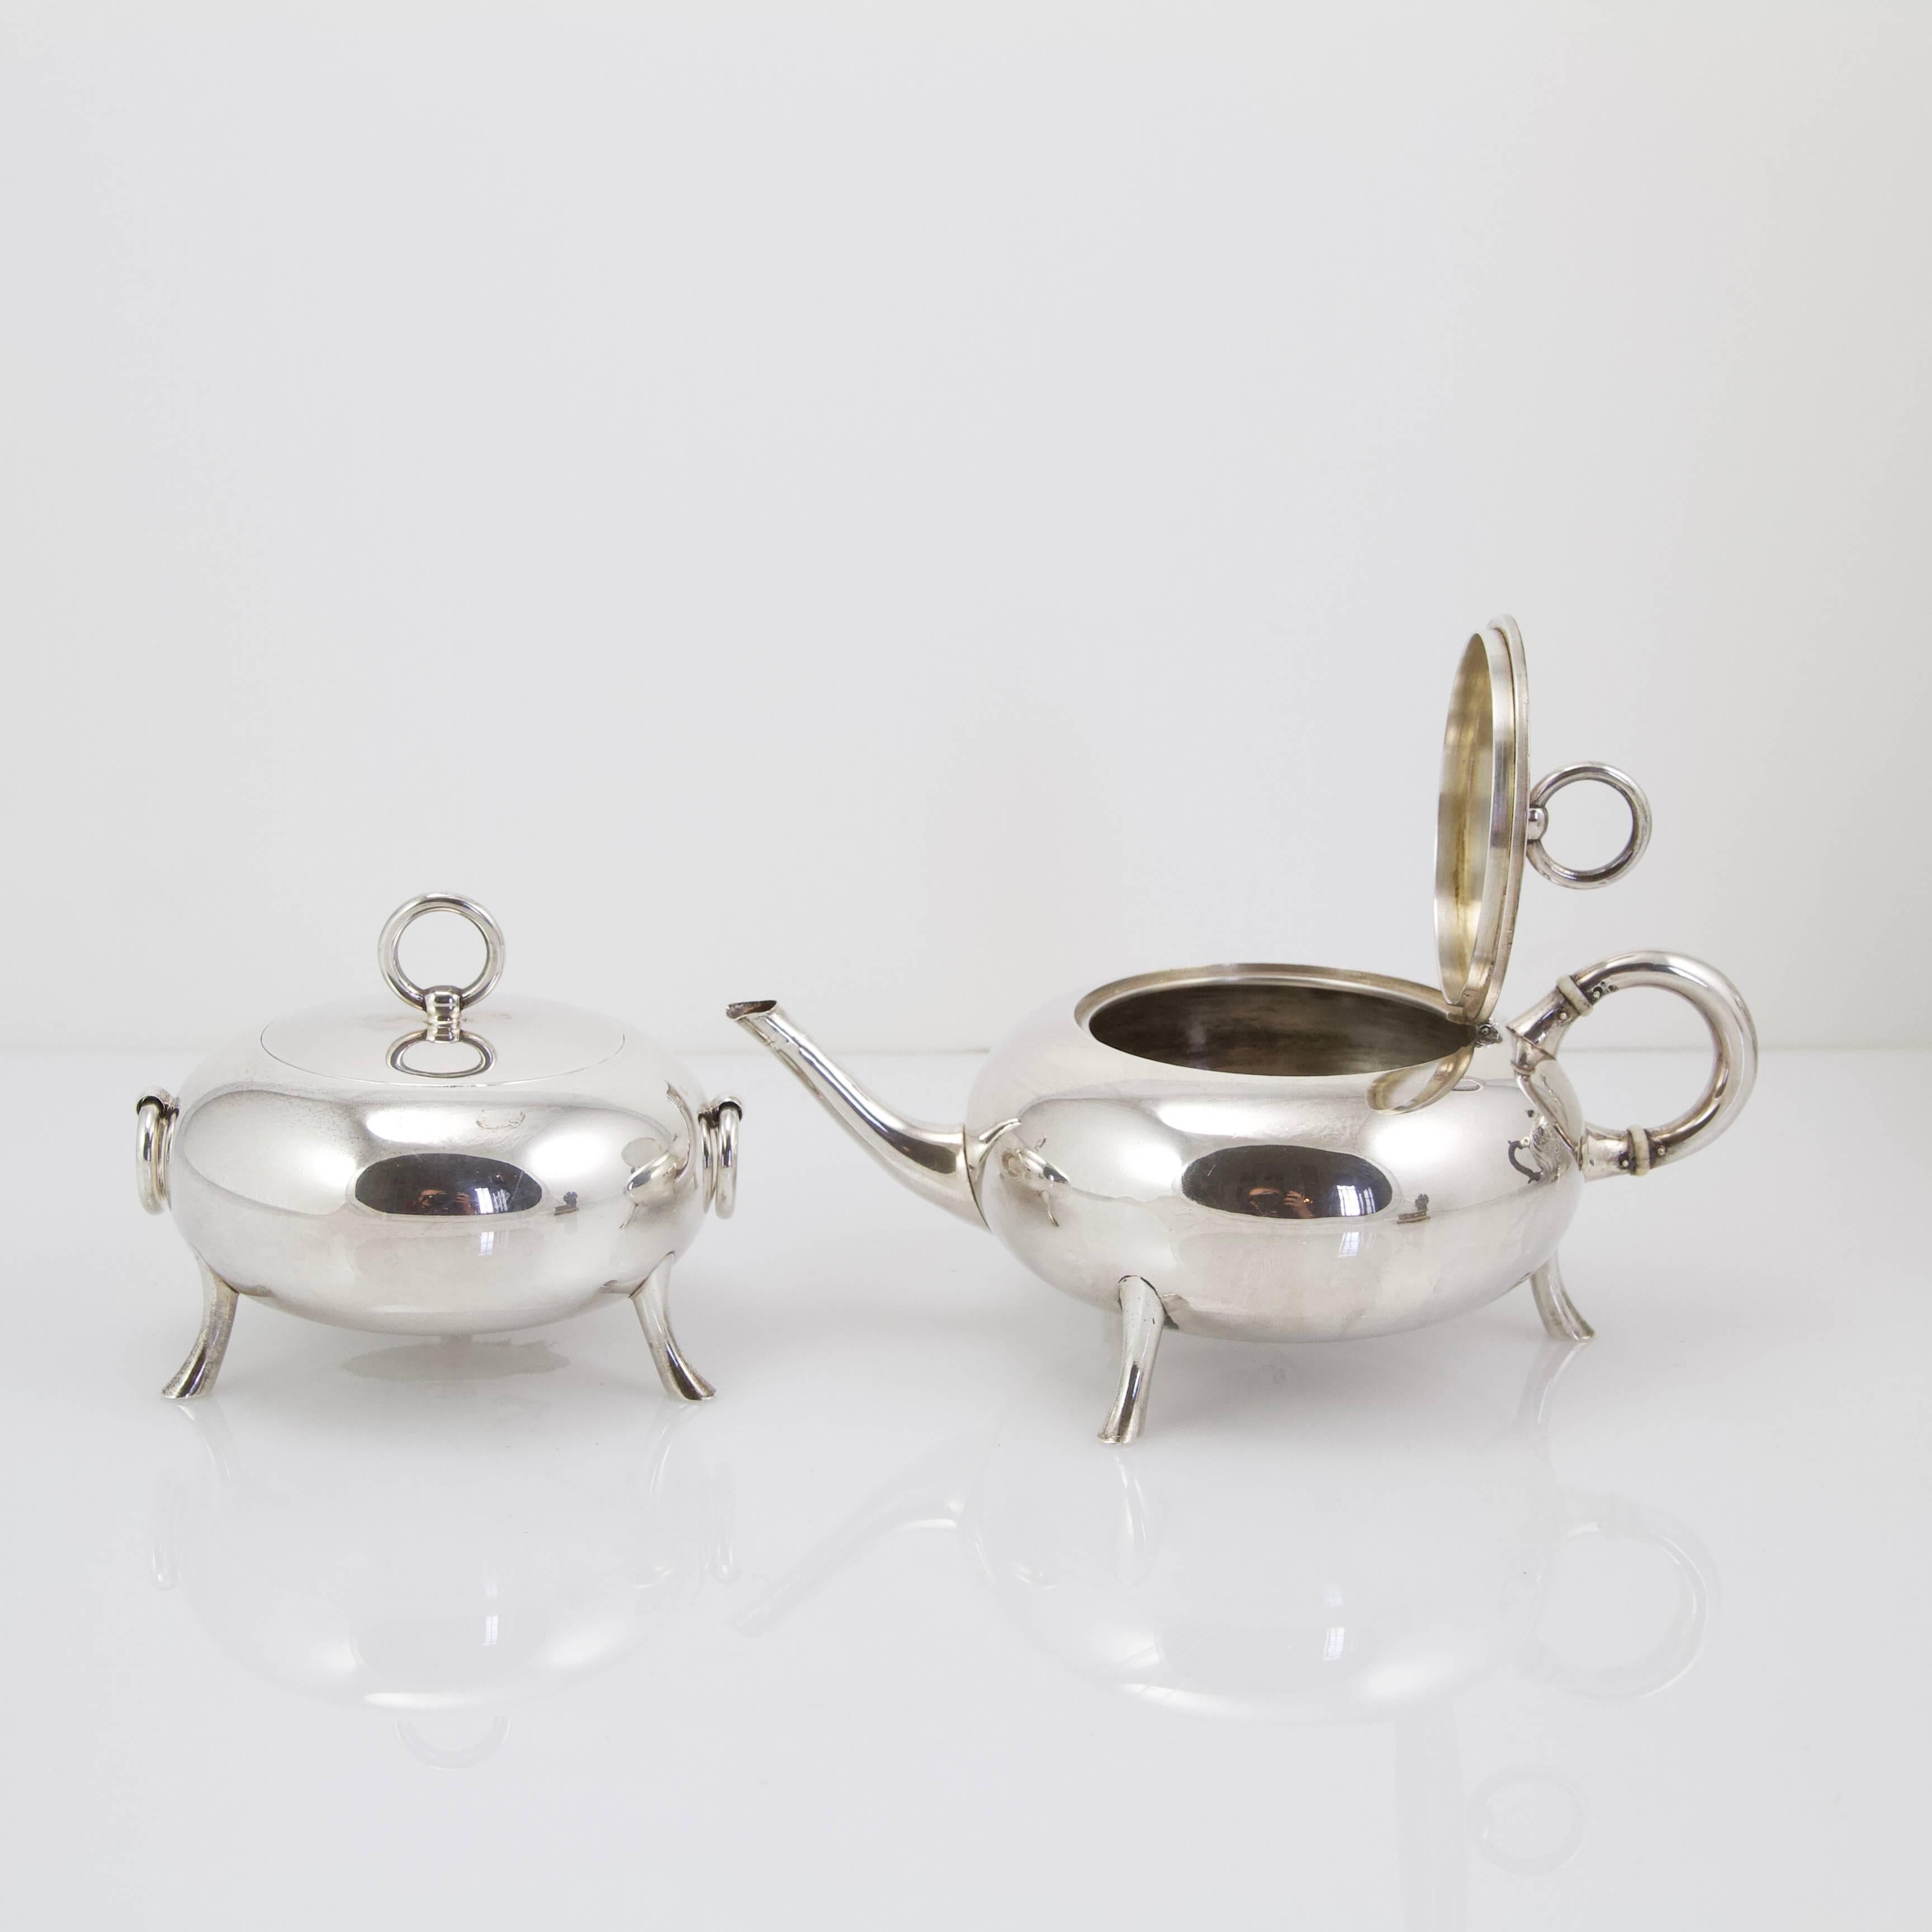 Very modernist selfish tea pot and its sugar pot. Silver sterling, super pot gilded inside.
Made by Maison Ravaut in Paris.
Maker mark and signature on the bottom of each piece.
Maison Ravaut located in Paris 15 rue de la Paix and had been bought